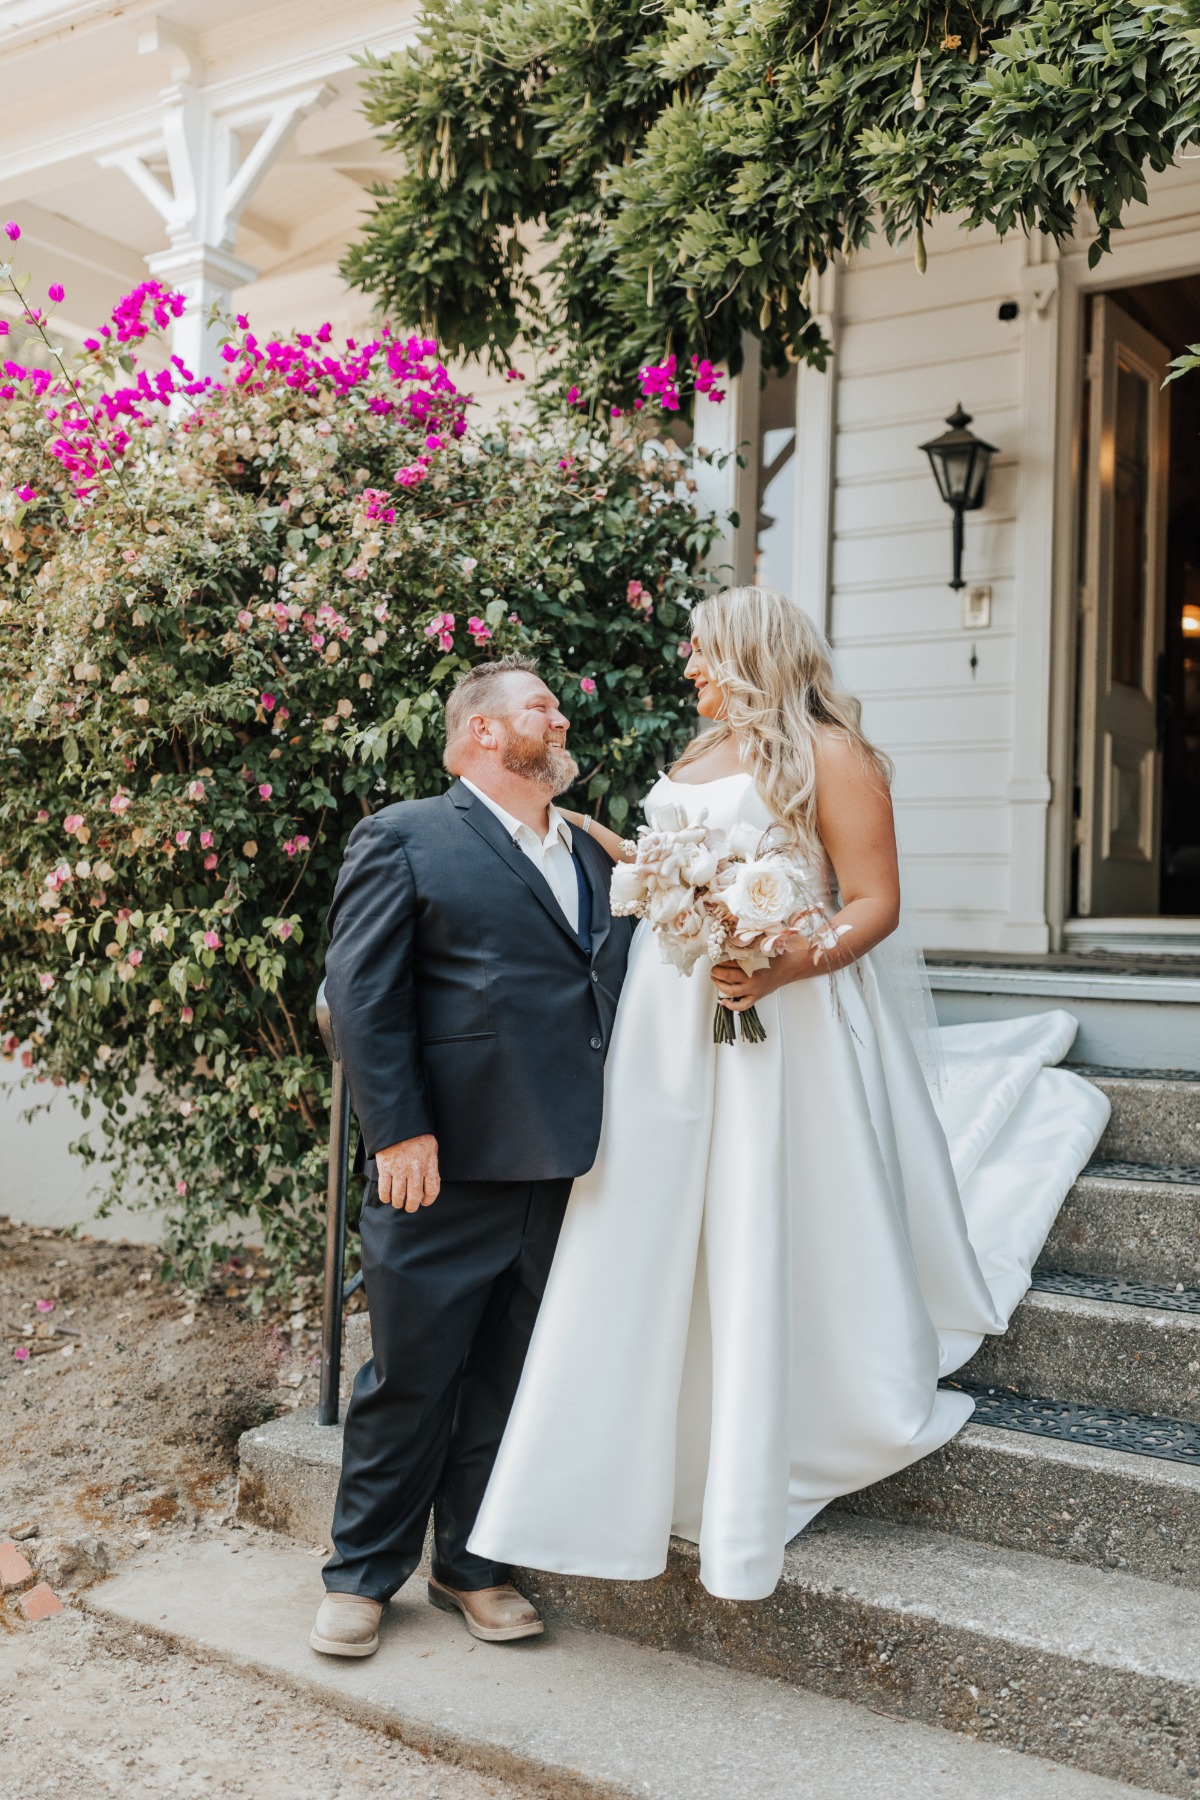 A Wedding Celebration inspired by their Italian Heritage and New Daughter